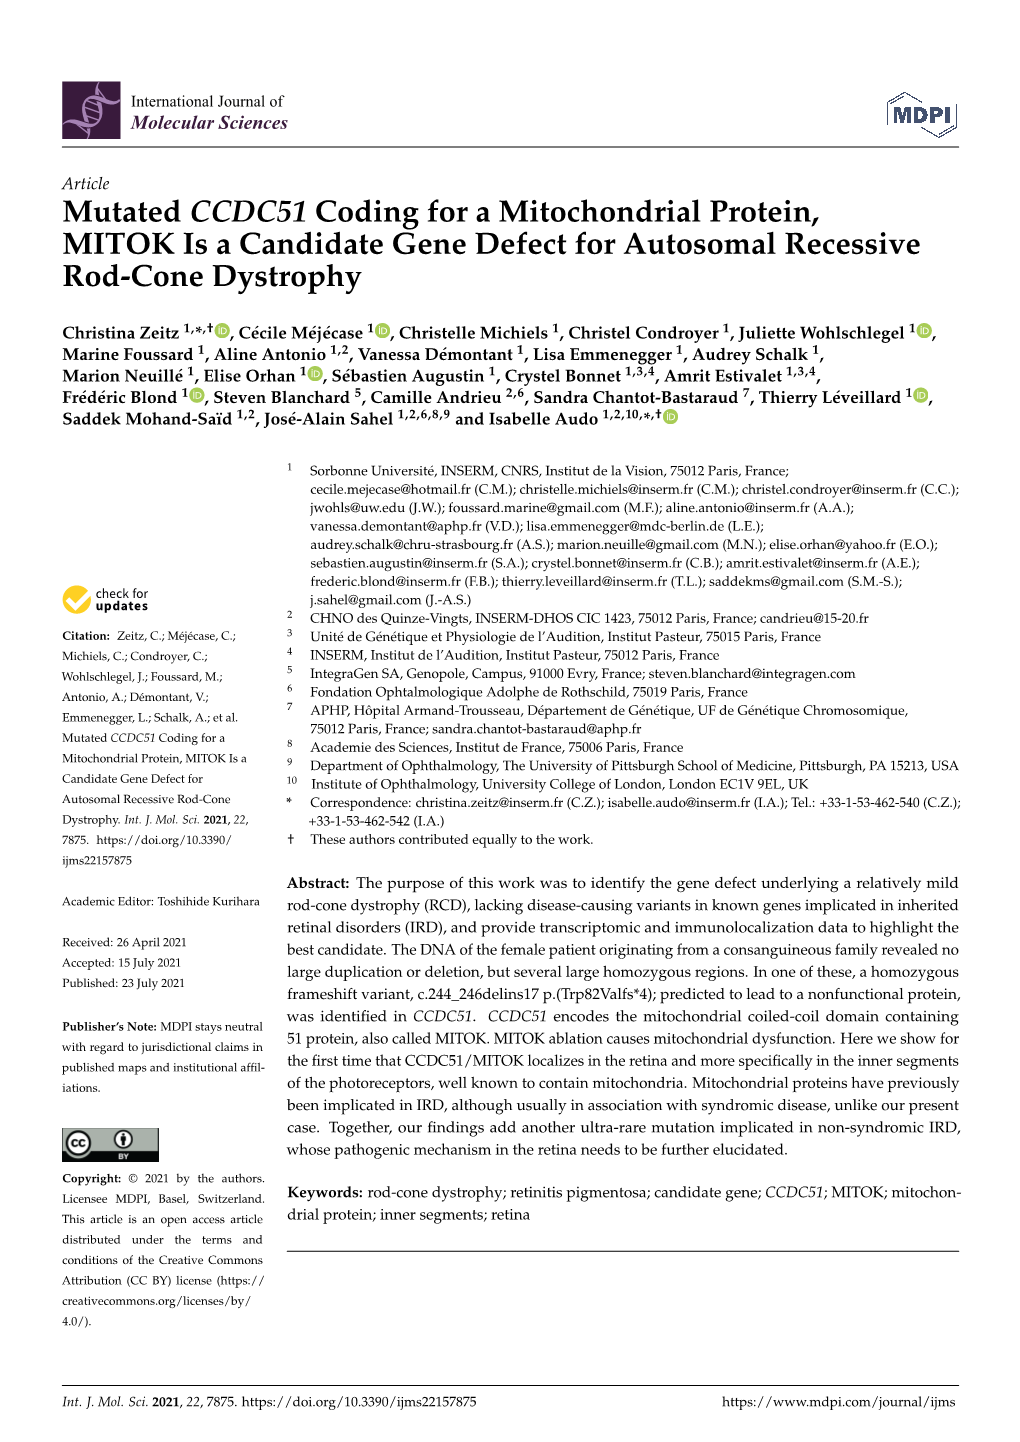 Mutated CCDC51 Coding for a Mitochondrial Protein, MITOK Is a Candidate Gene Defect for Autosomal Recessive Rod-Cone Dystrophy